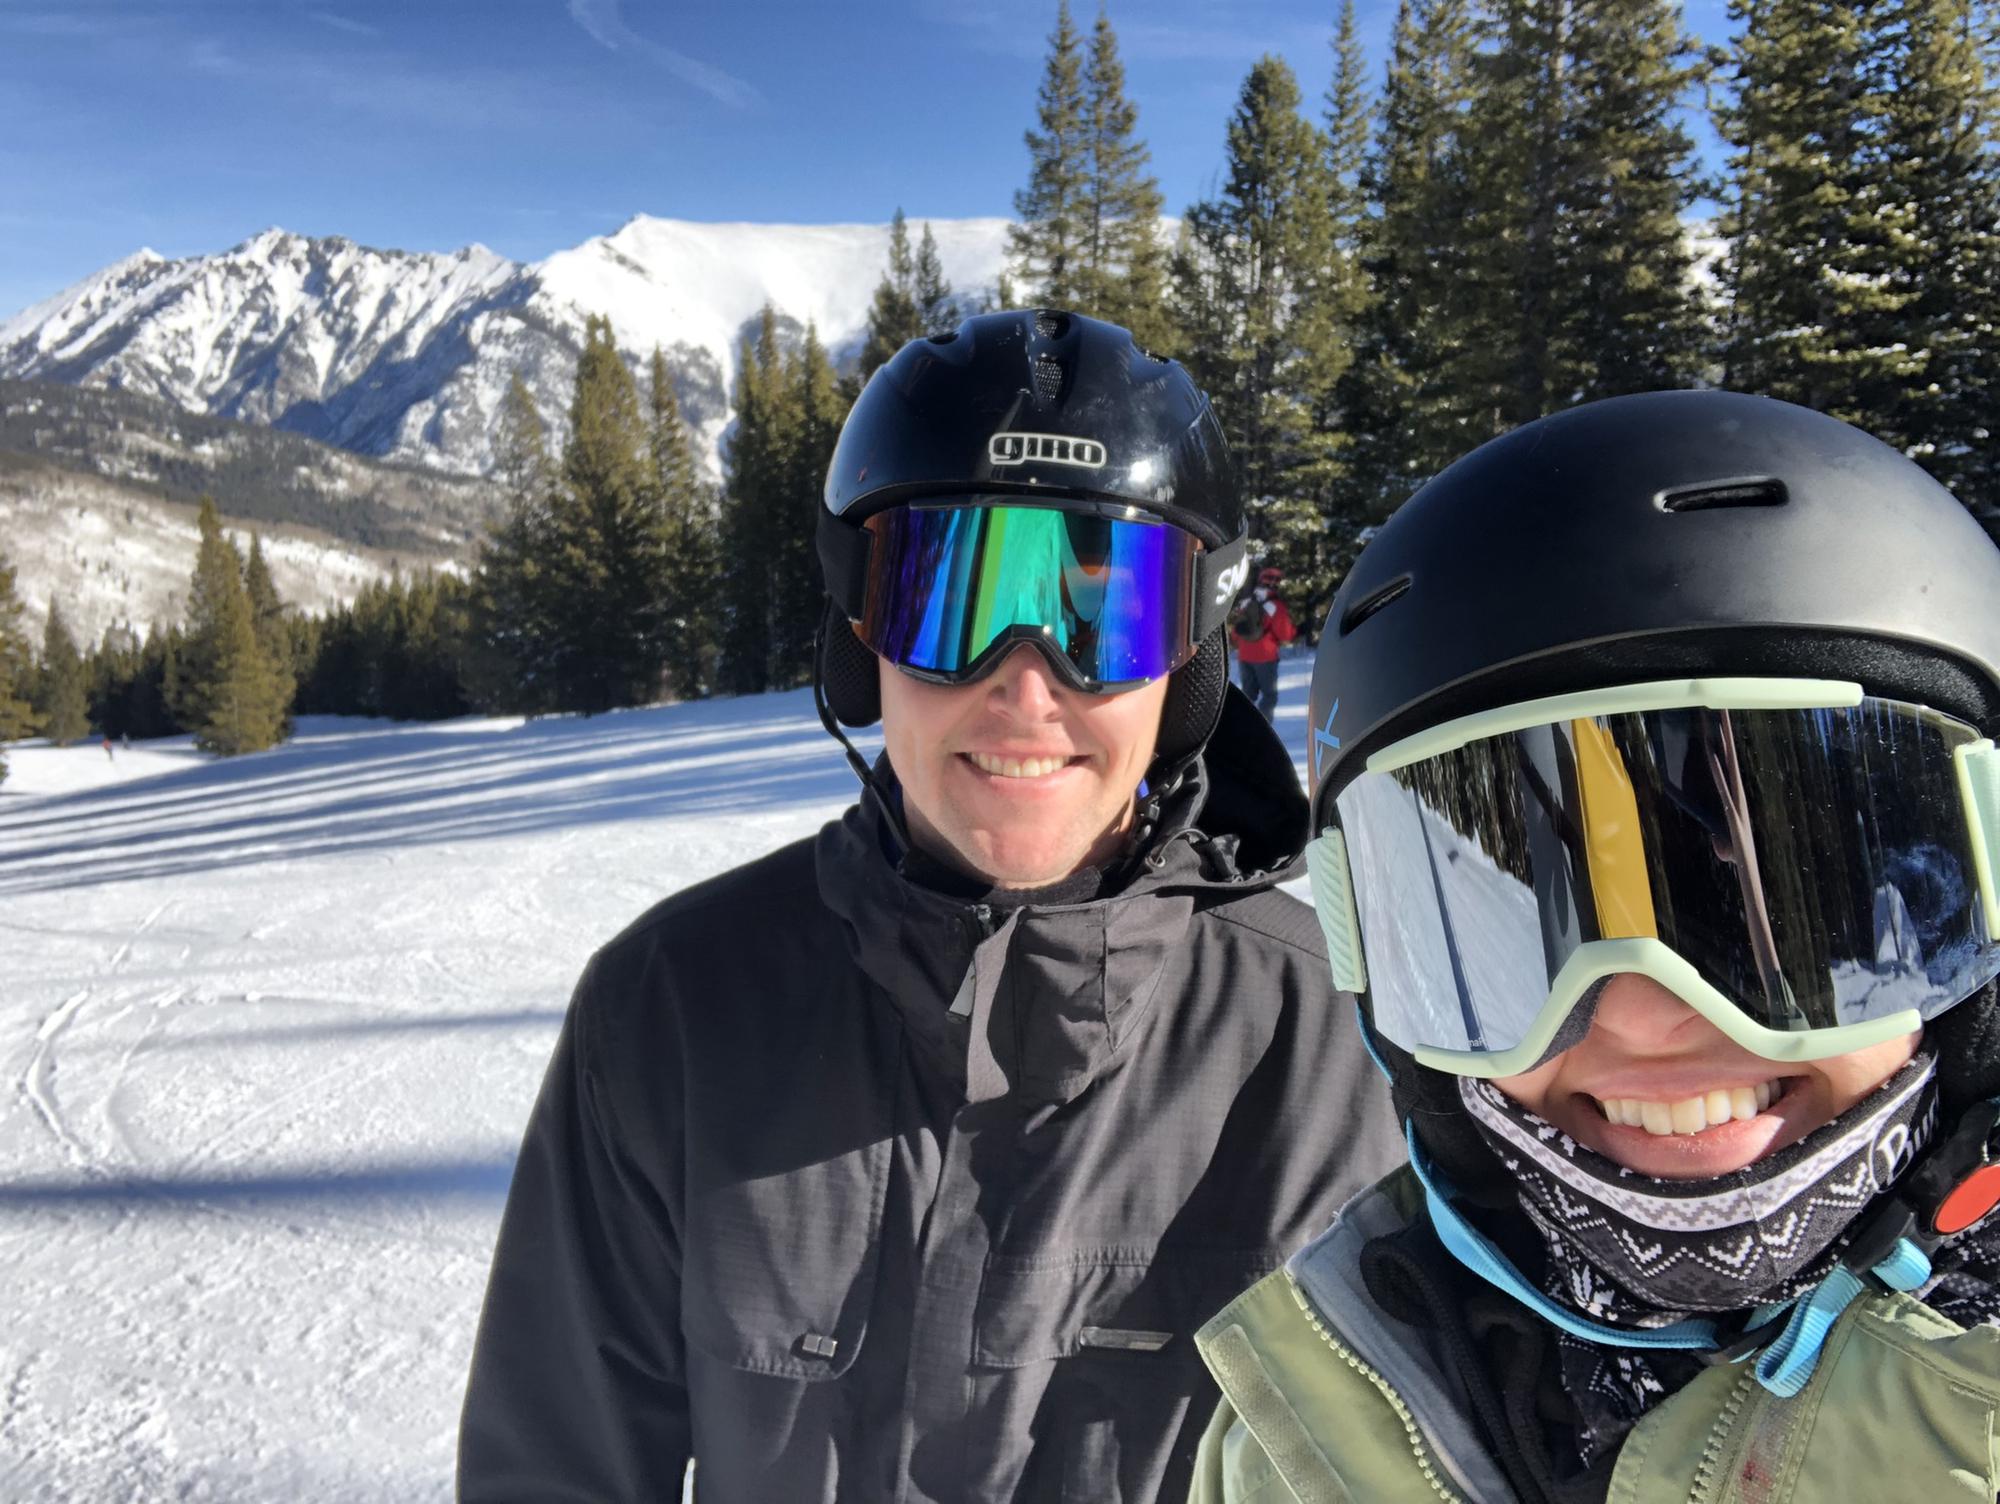 First time skiing together!